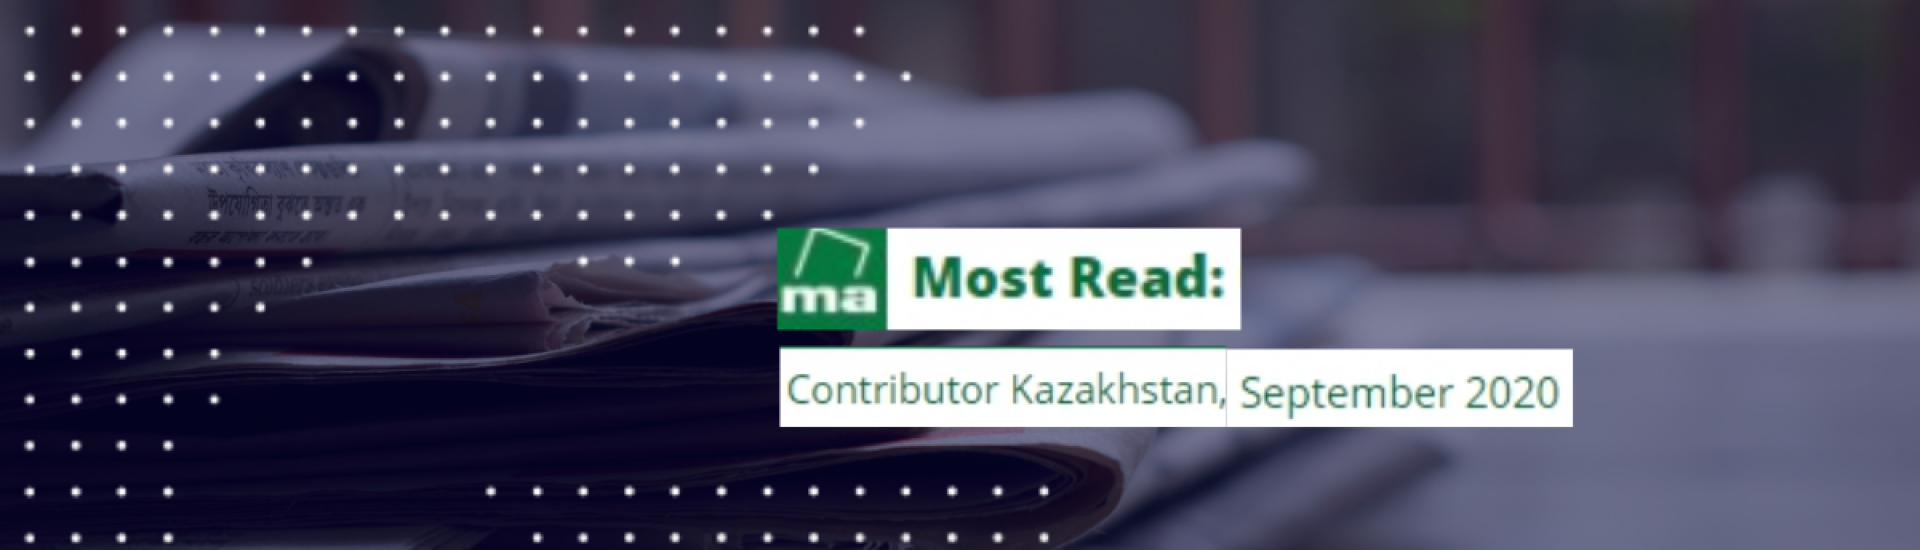 GRATA International became a Mondaq Contributor With Most Reader Response In Kazakhstan in September